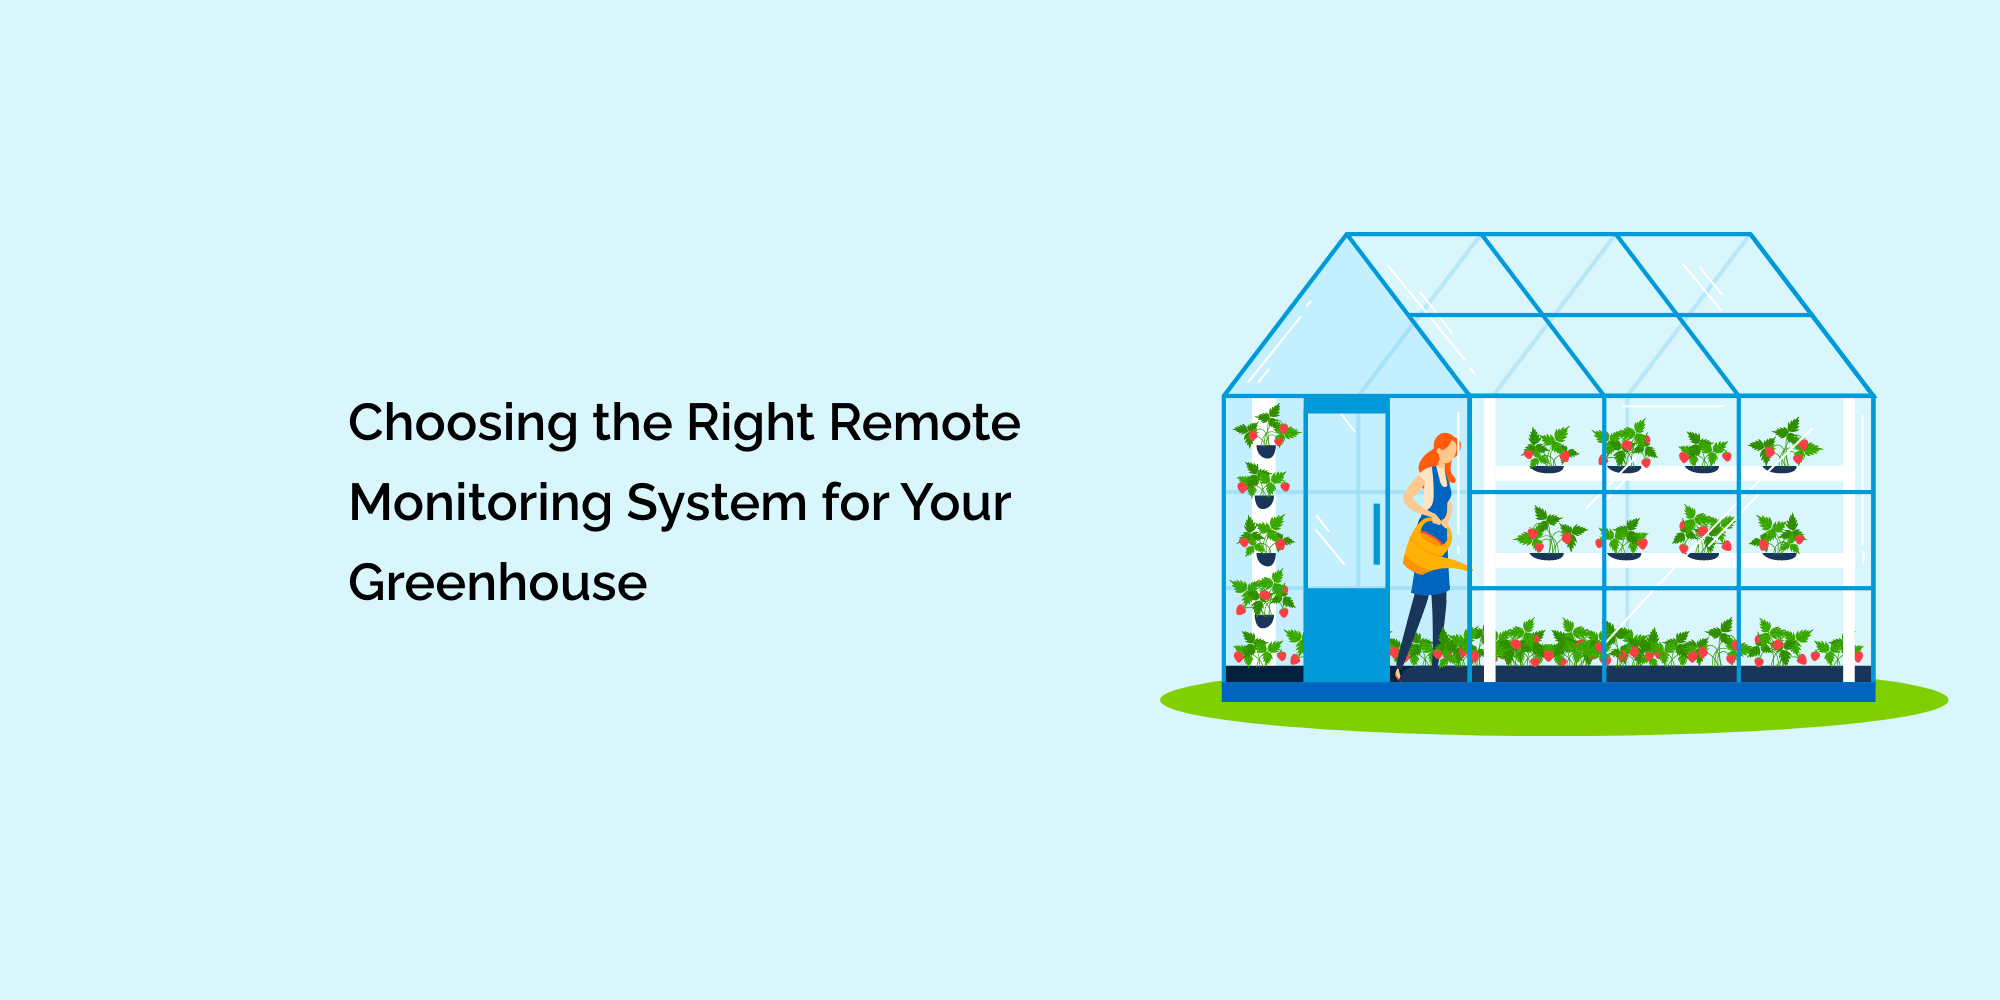 Choosing the Right Remote Monitoring System for Your Greenhouse